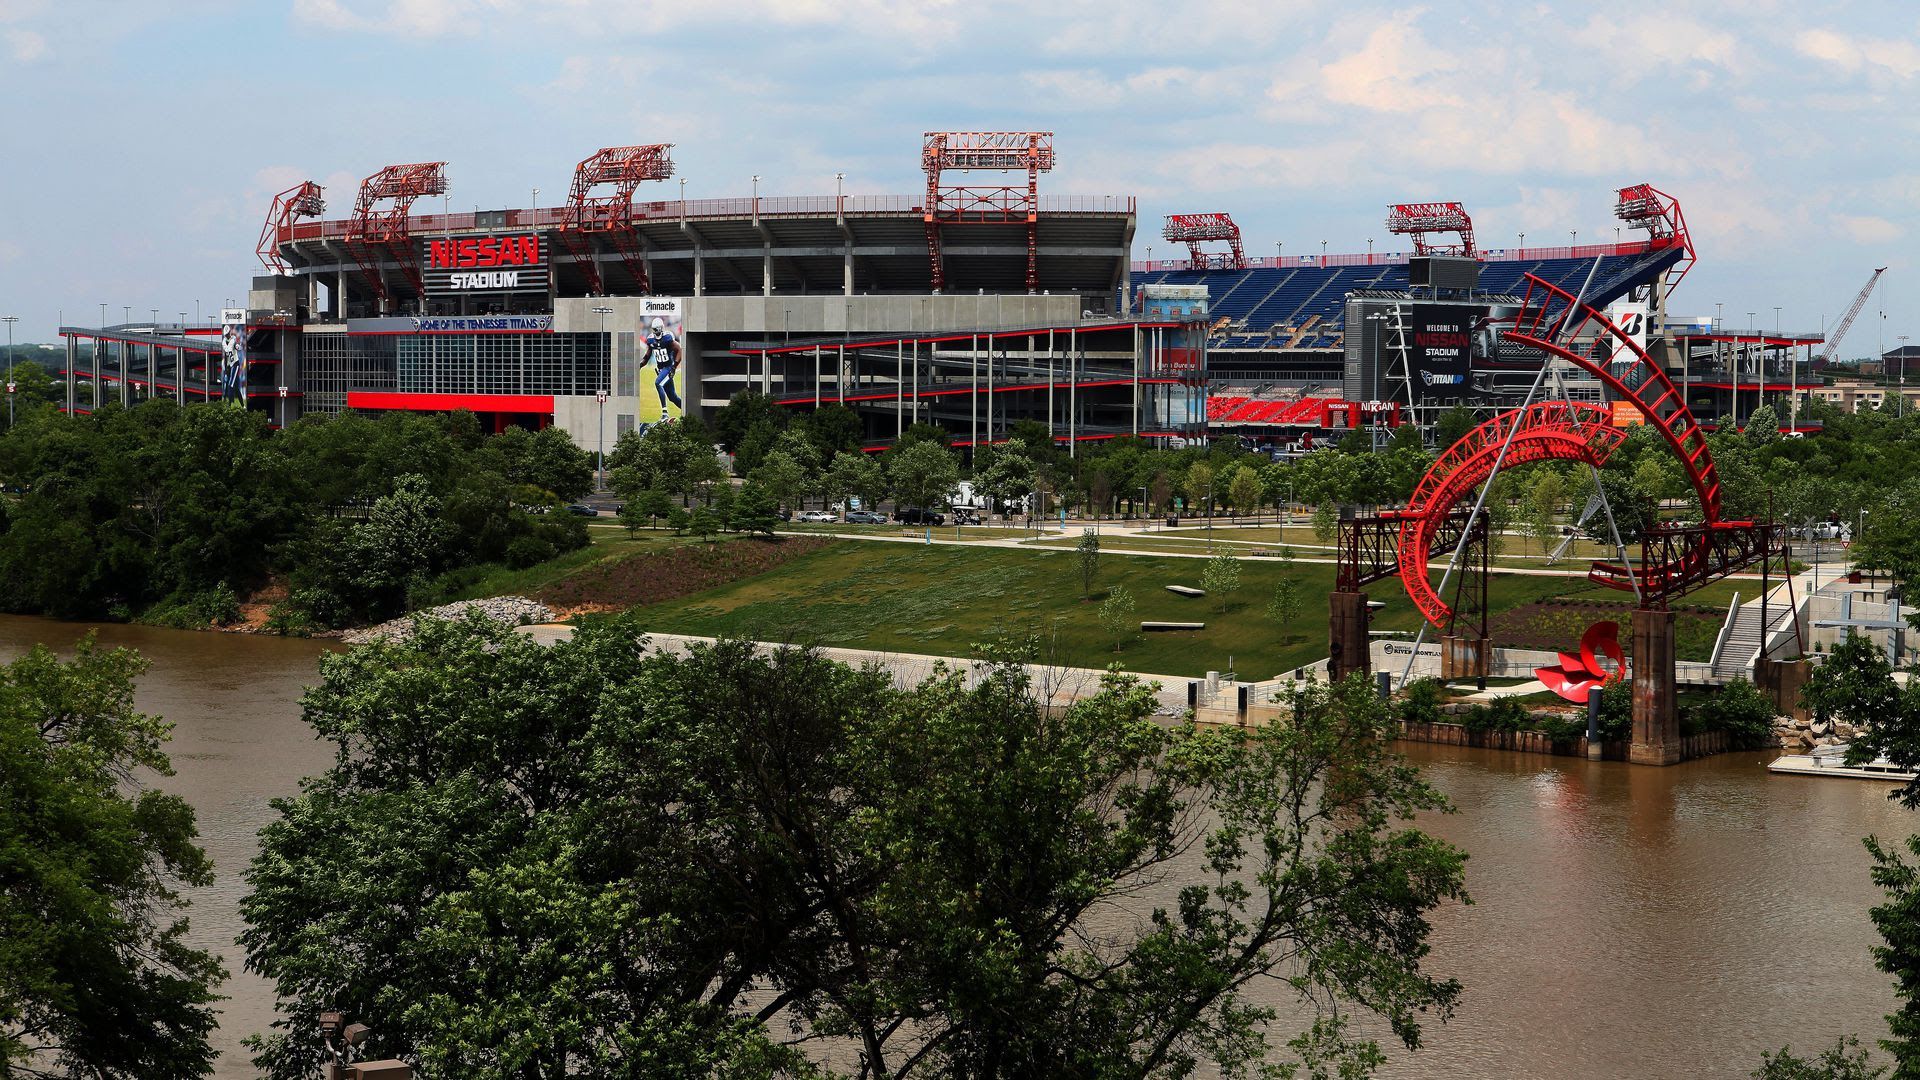 Report: Stadium lease would cost Nashville $1.8B - Axios Nashville